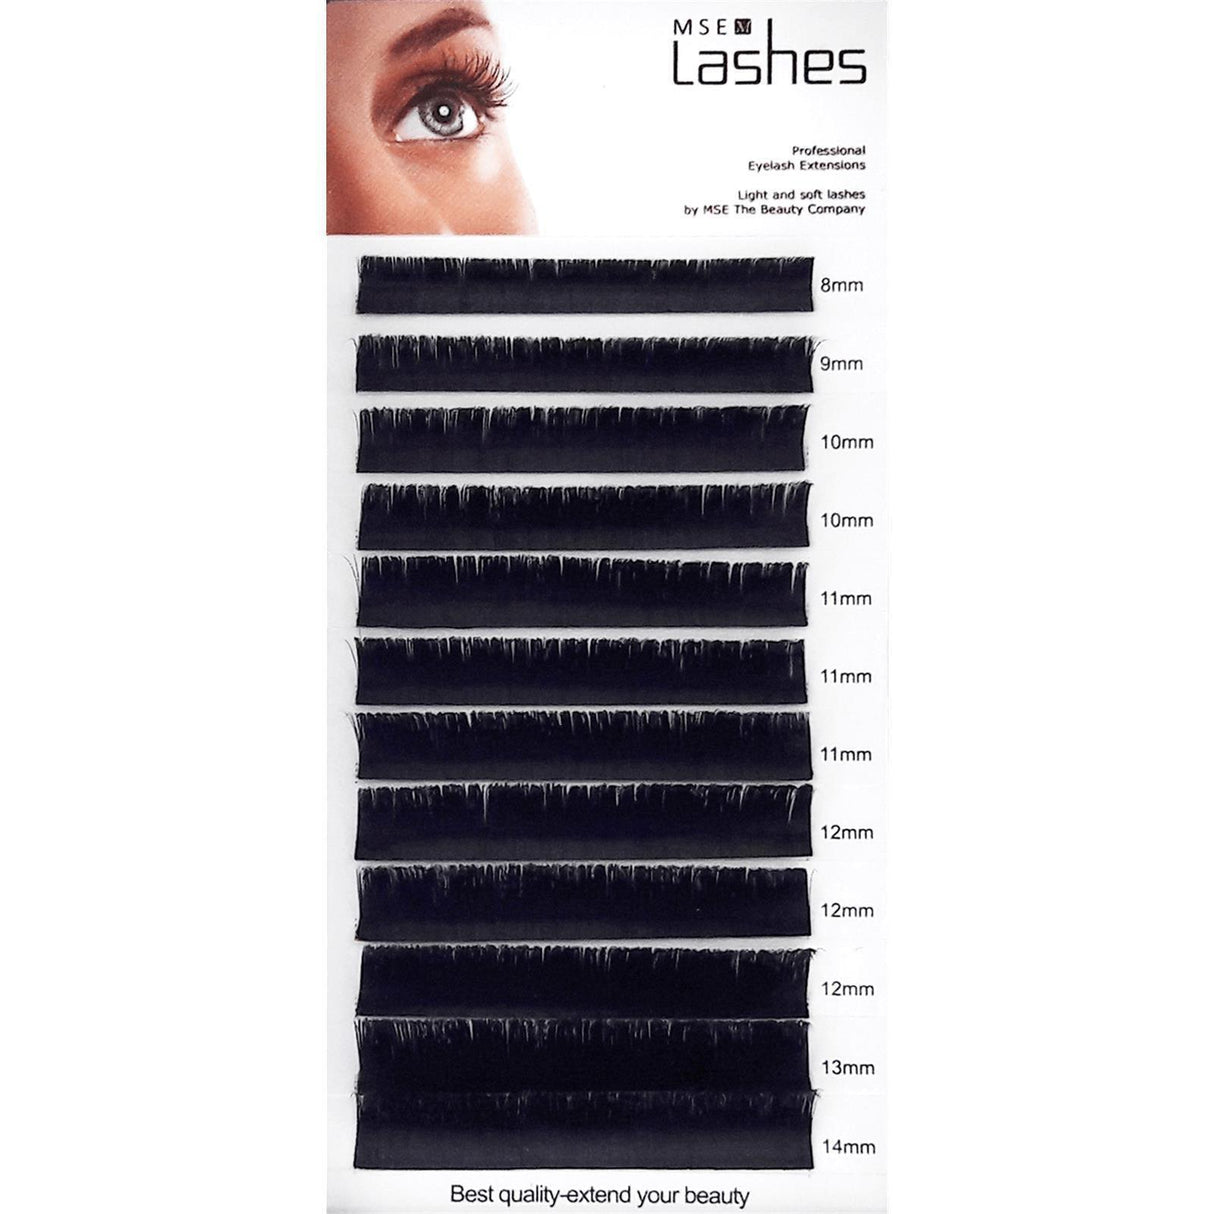 Seidenwimpern Blooming Lashes Trays - C-Curl - 0,07 mm - 11 mm - MSE - The Beauty Company